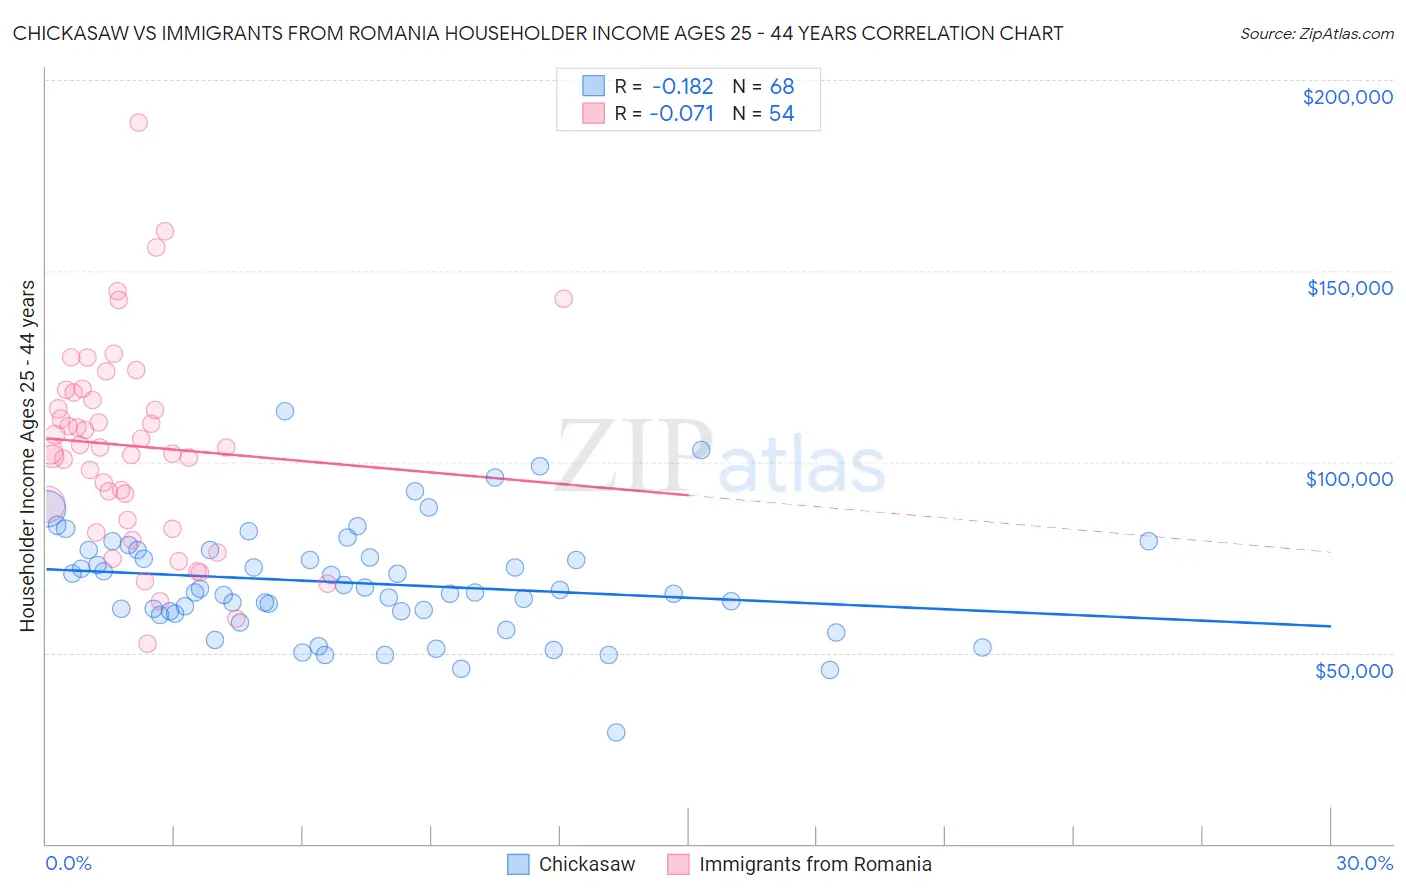 Chickasaw vs Immigrants from Romania Householder Income Ages 25 - 44 years